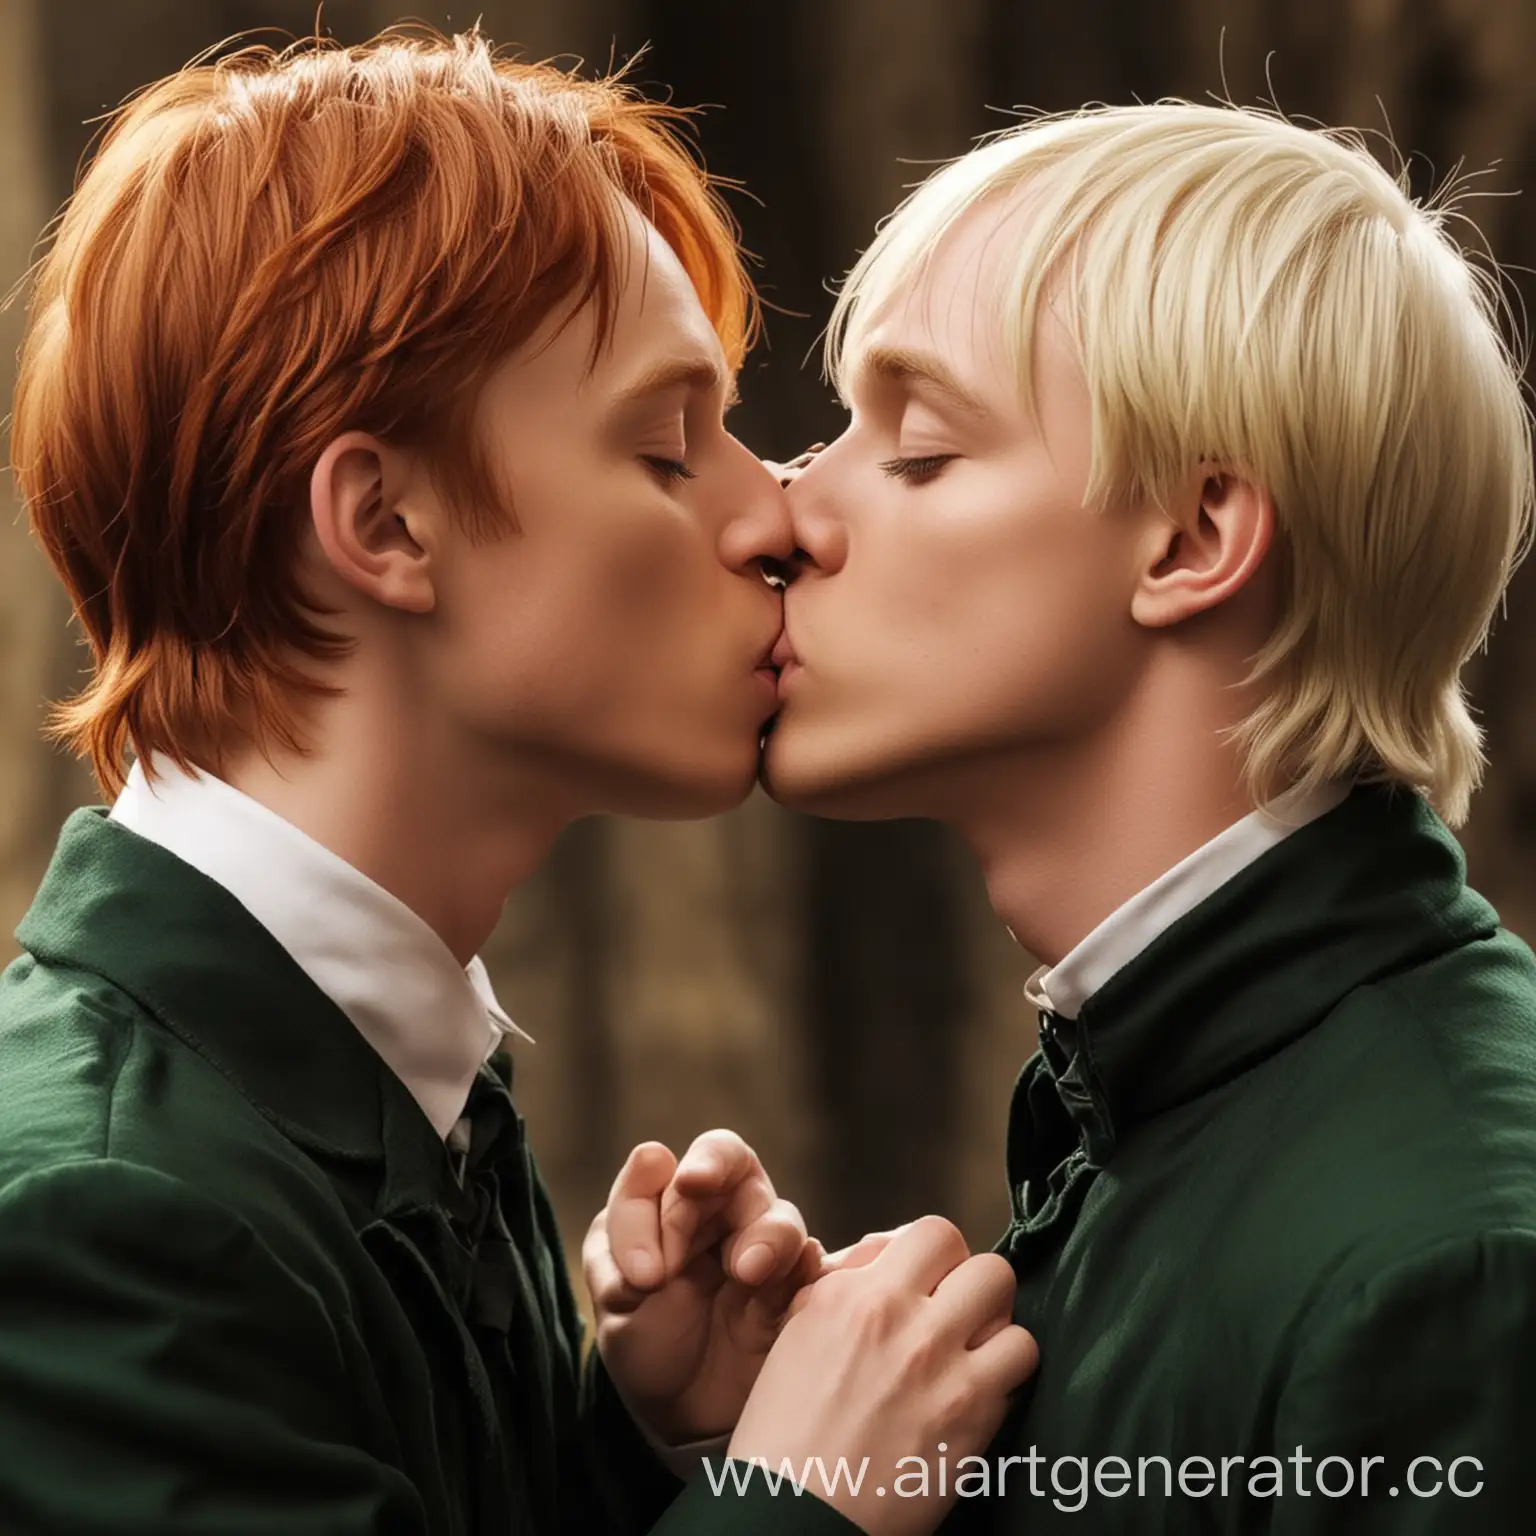 Ron-Weasley-Kissing-Draco-Malfoy-Intimate-Moment-in-the-Forbidden-Forest